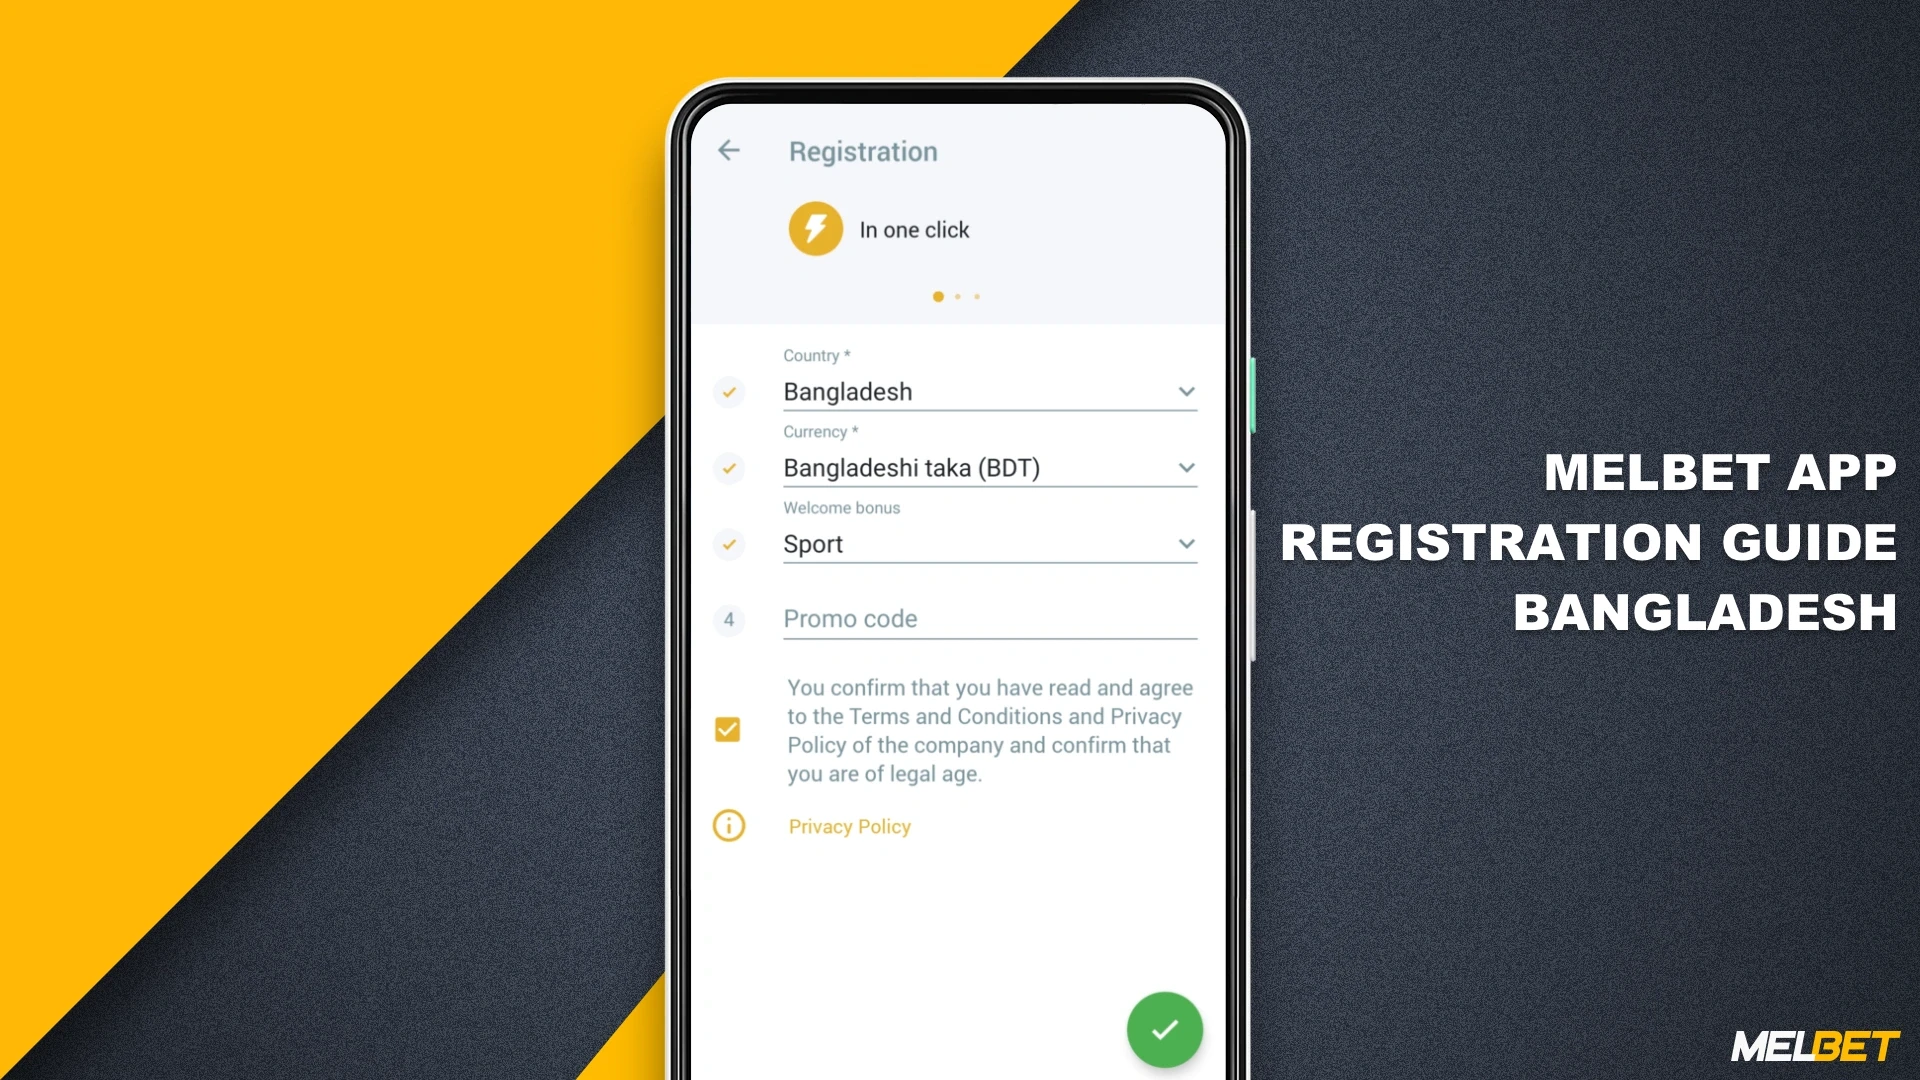 Registration in the Melbet app doesn't take much time, a few clicks and you have a personal account